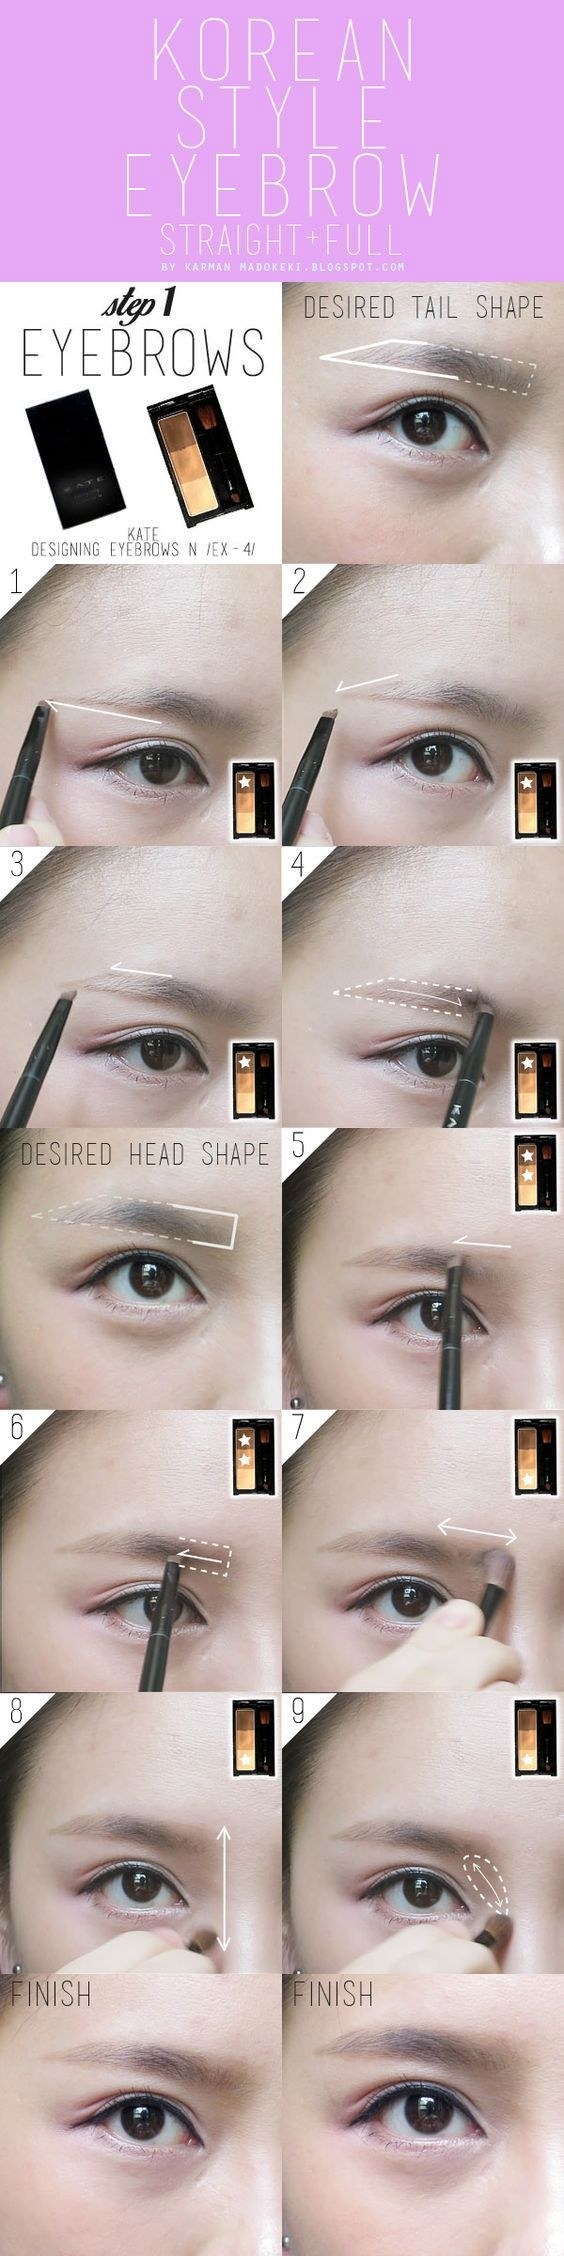 Shaping eyebrows (especially if yours are sparse or uneven) is an easy way to alter and frame your face. Here's a step-by-step for the classic, straight Korean shape.